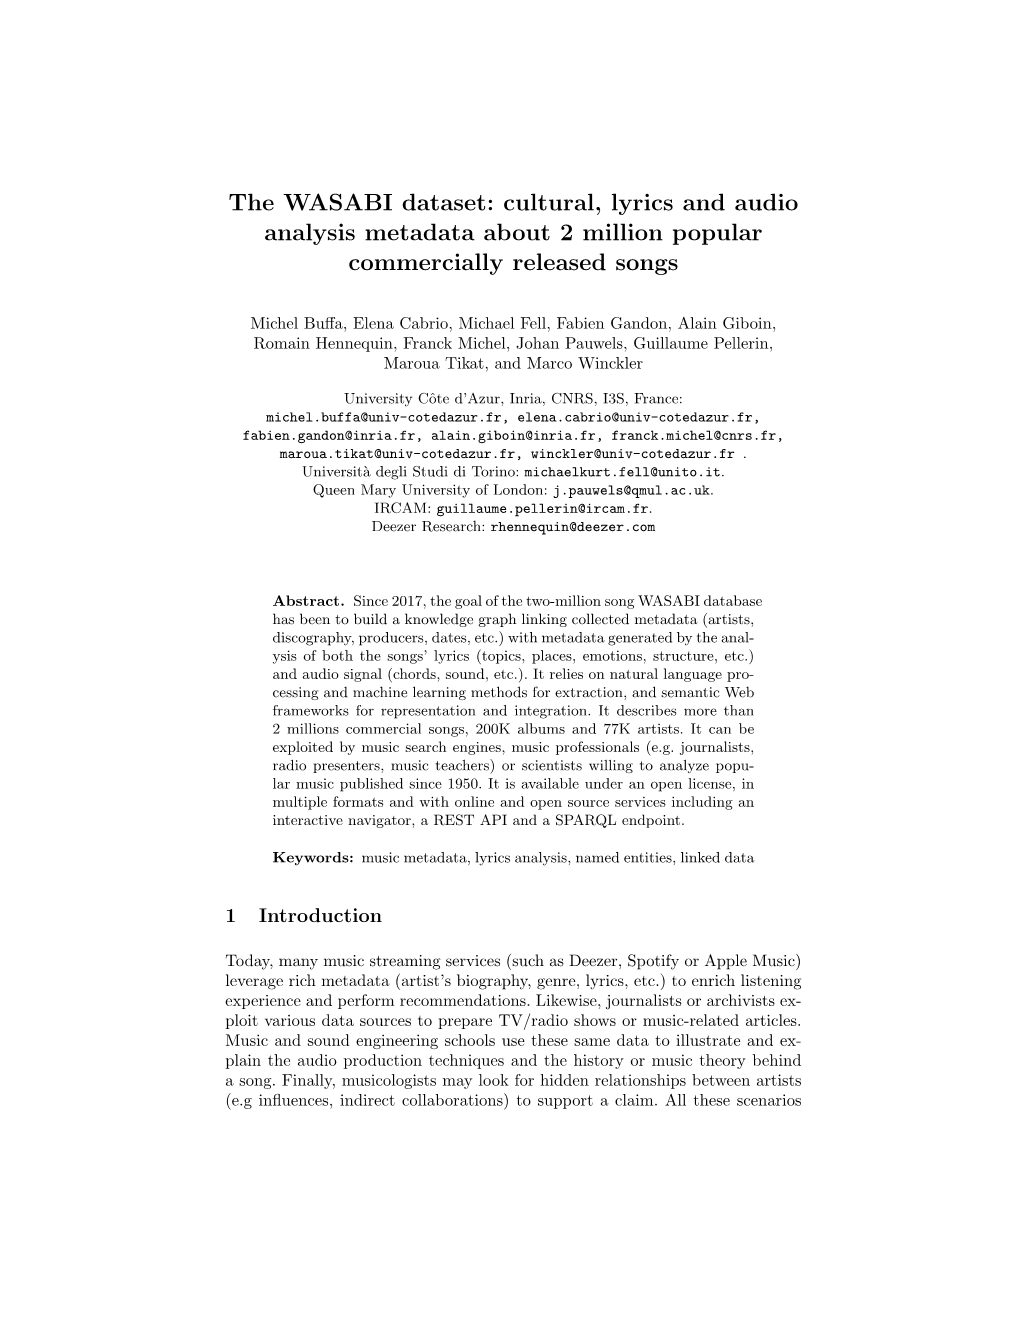 The WASABI Dataset: Cultural, Lyrics and Audio Analysis Metadata About 2 Million Popular Commercially Released Songs